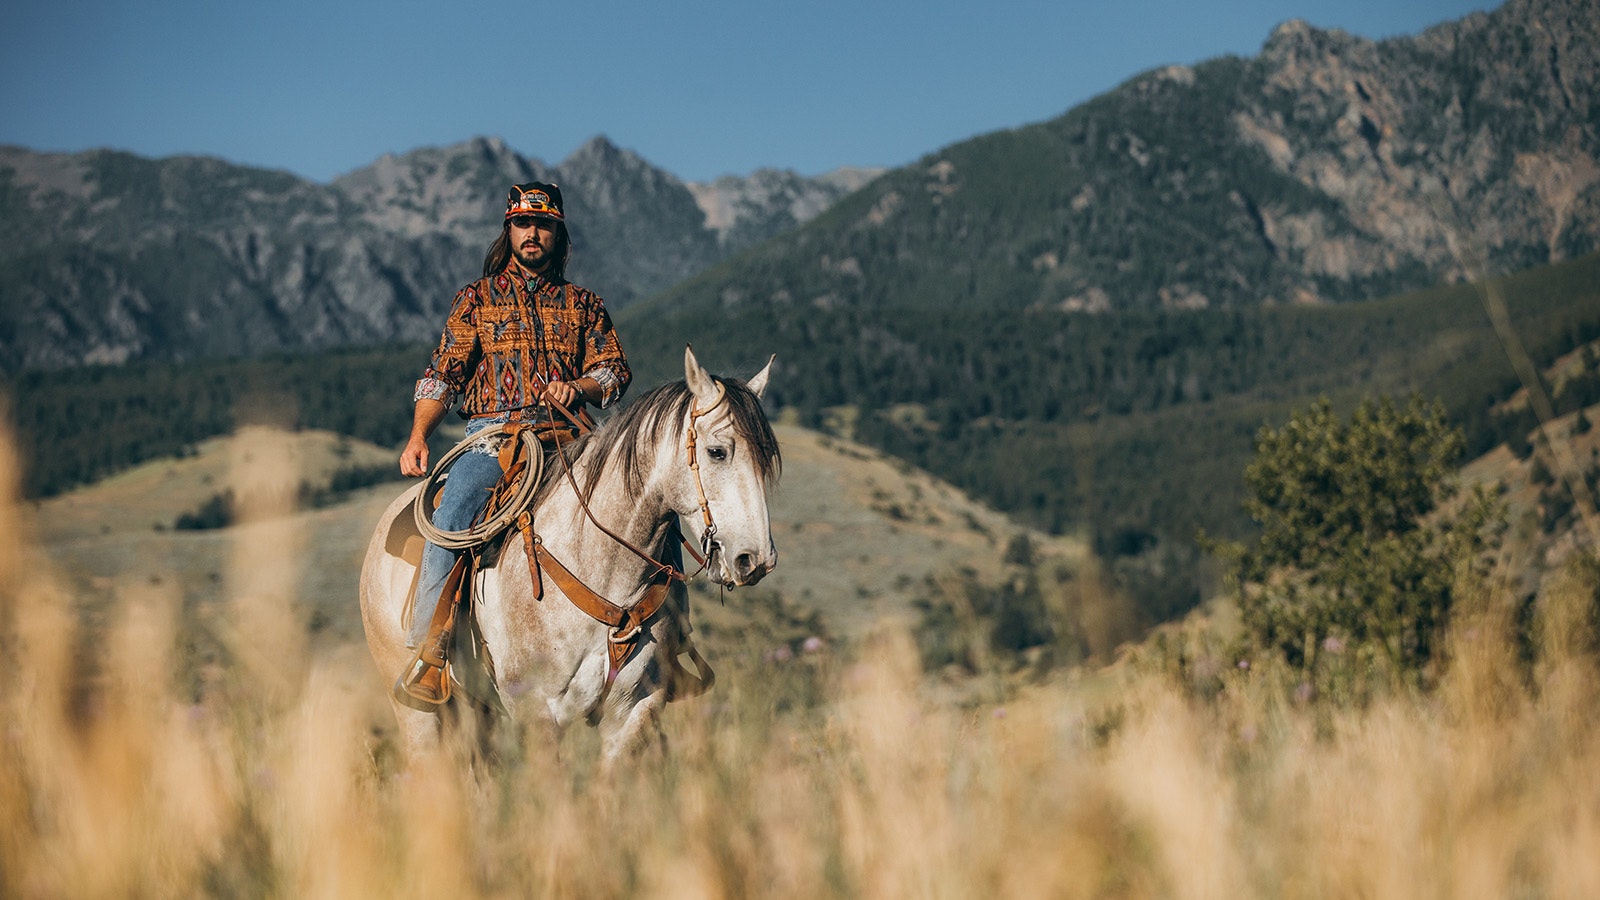 Ian Munsick is a country music artist who grew up ranching near Sheridan, Wyoming. His latest project is a love letter to Wyoming and the American West.